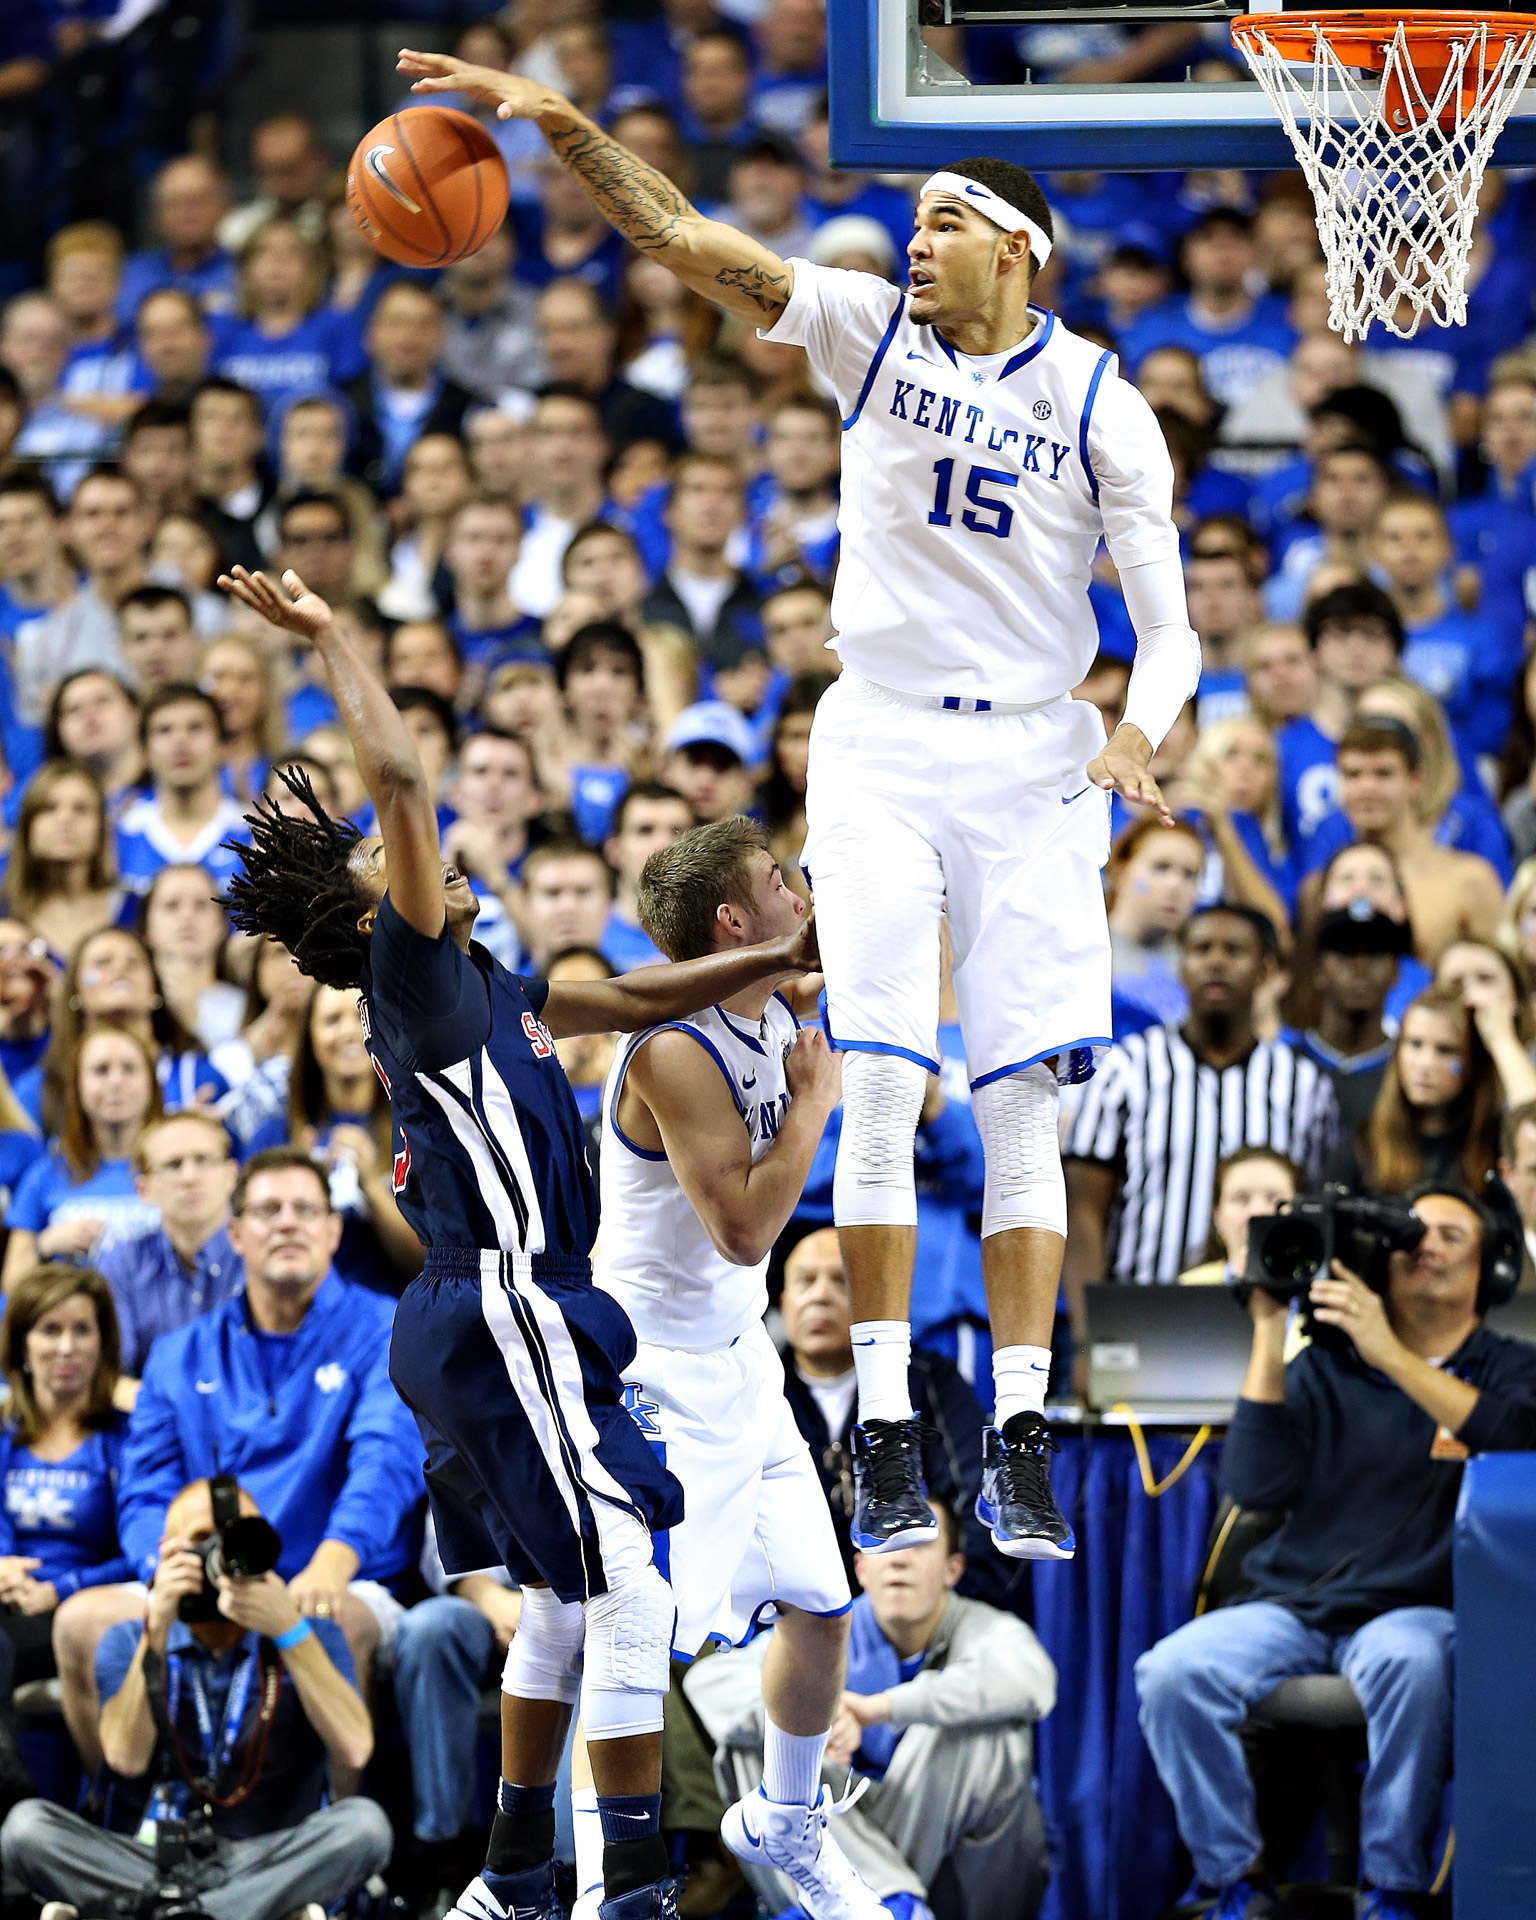 Ceiling Man - Photos of the Day for Dec. 05, 2012 - ESPN1536 x 1920